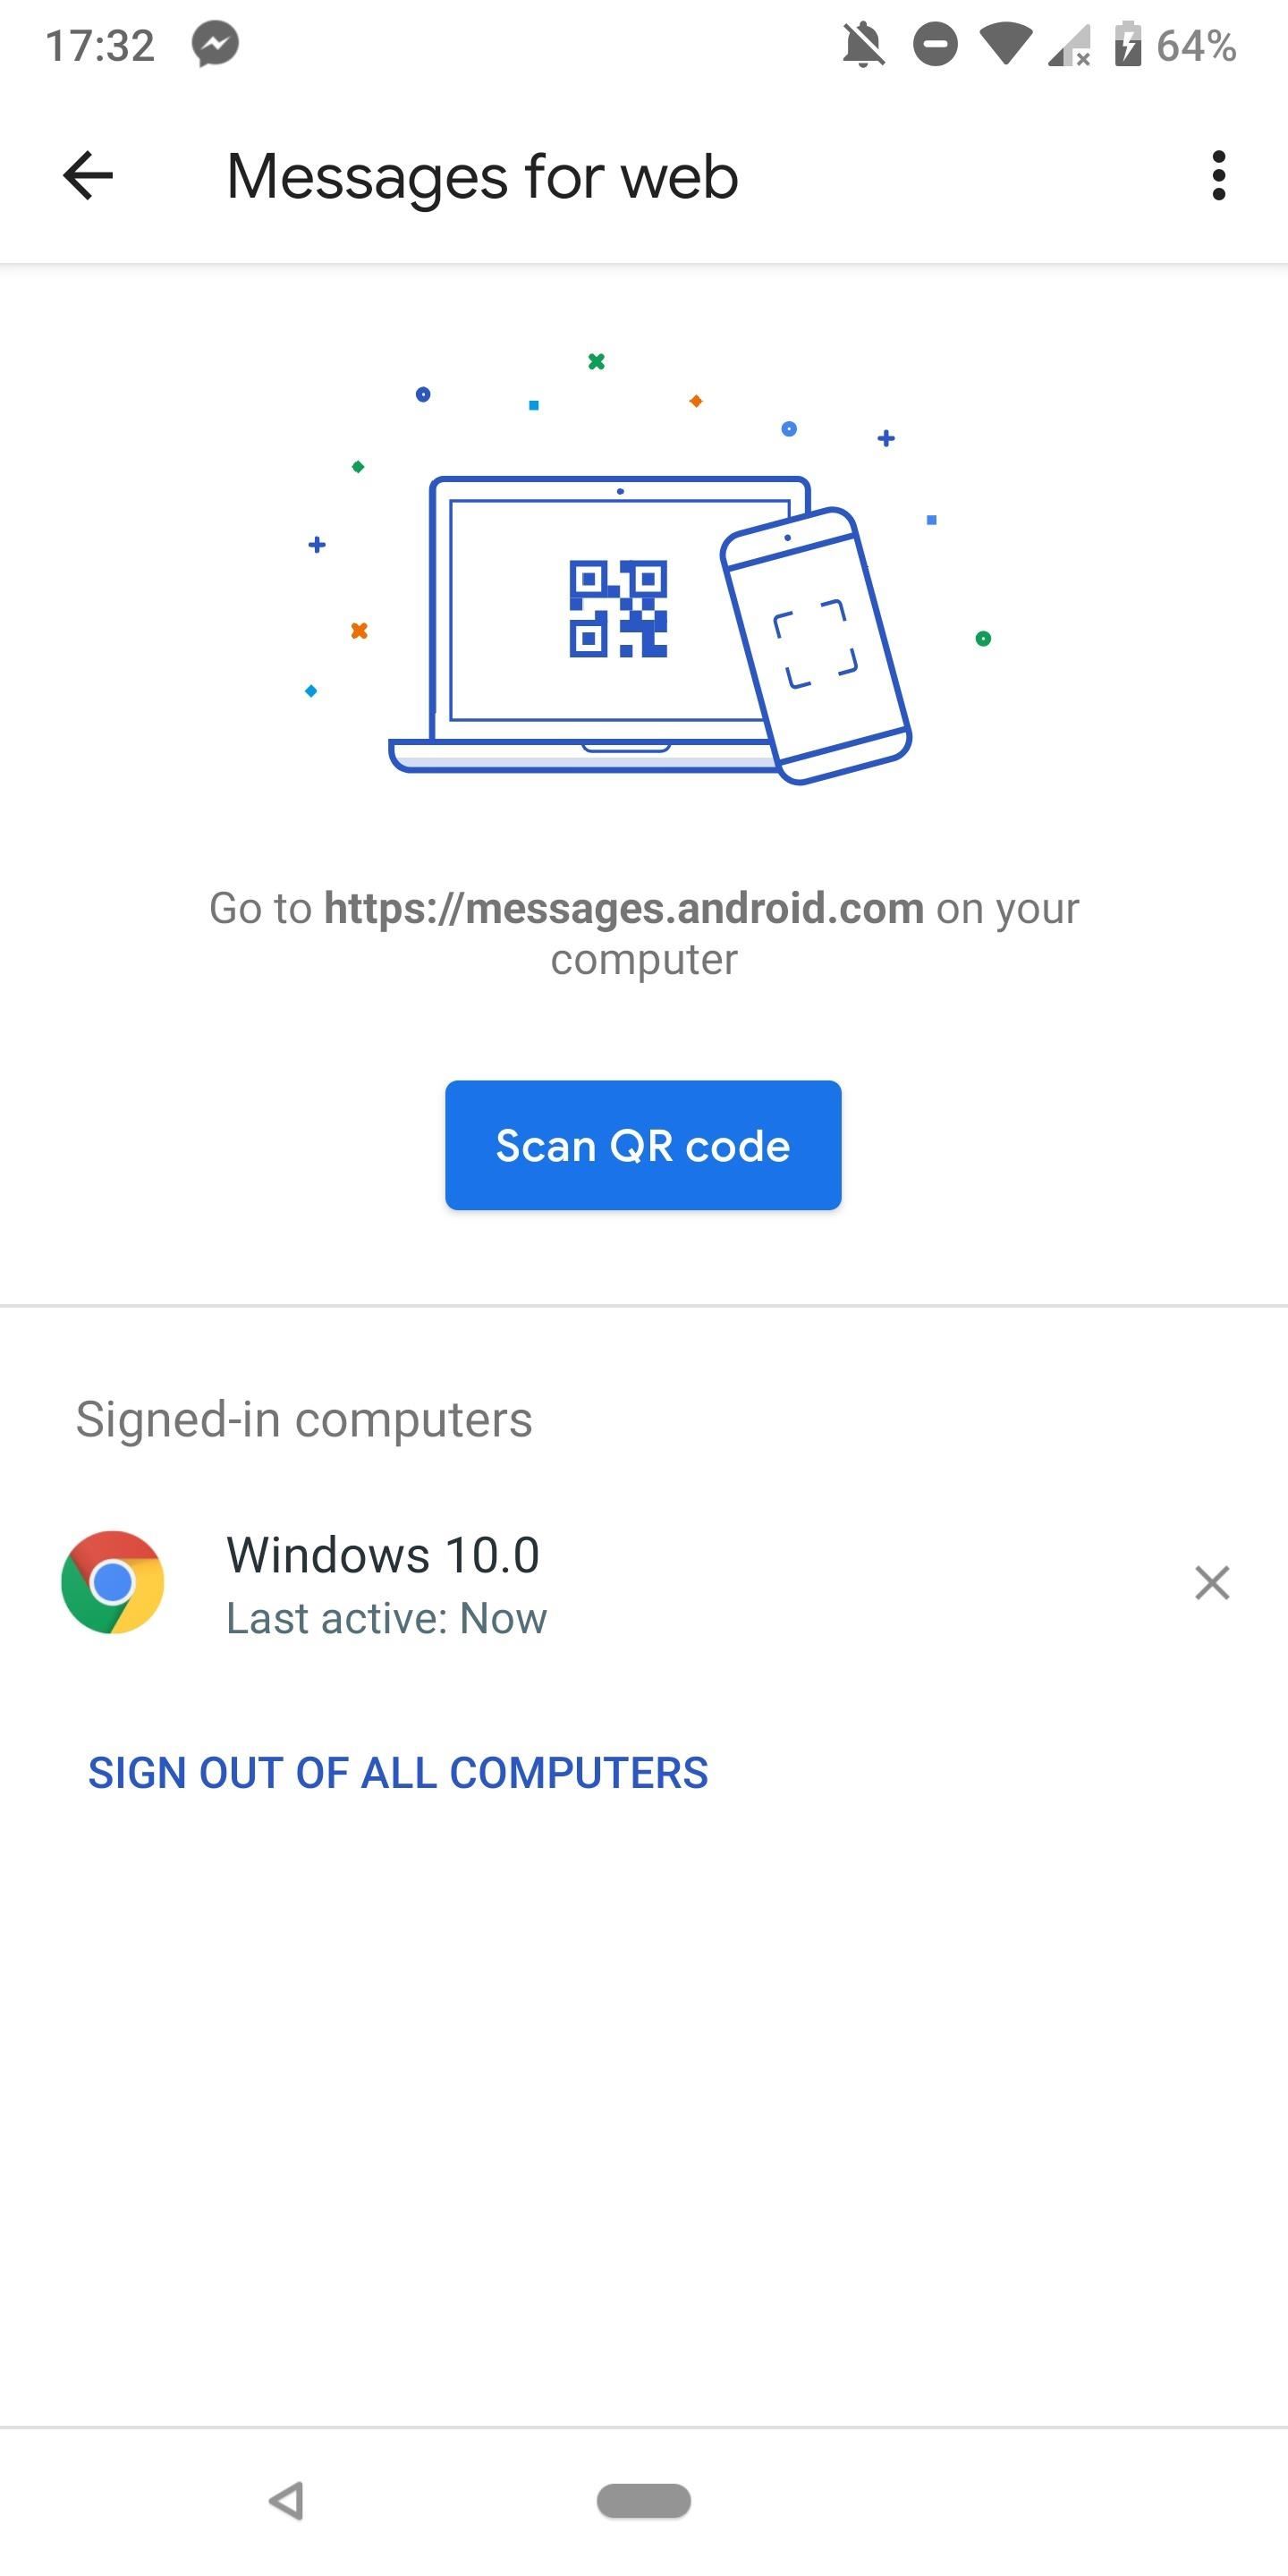 Send & Receive Texts from Any Computer with Android Messages